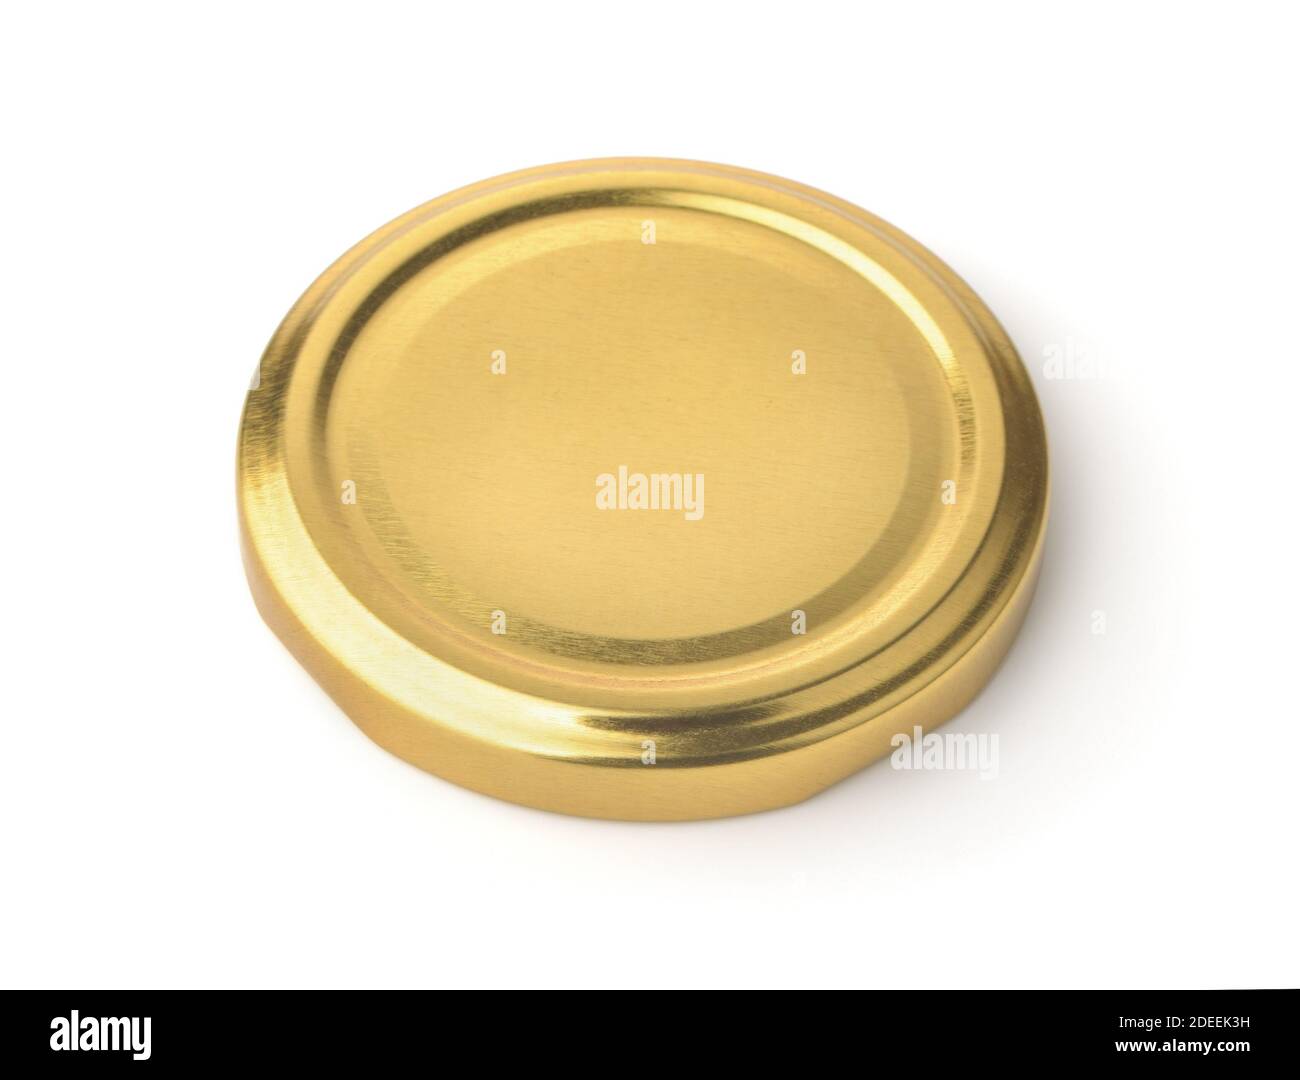 Golden metal jar lid isolated on white Stock Photo